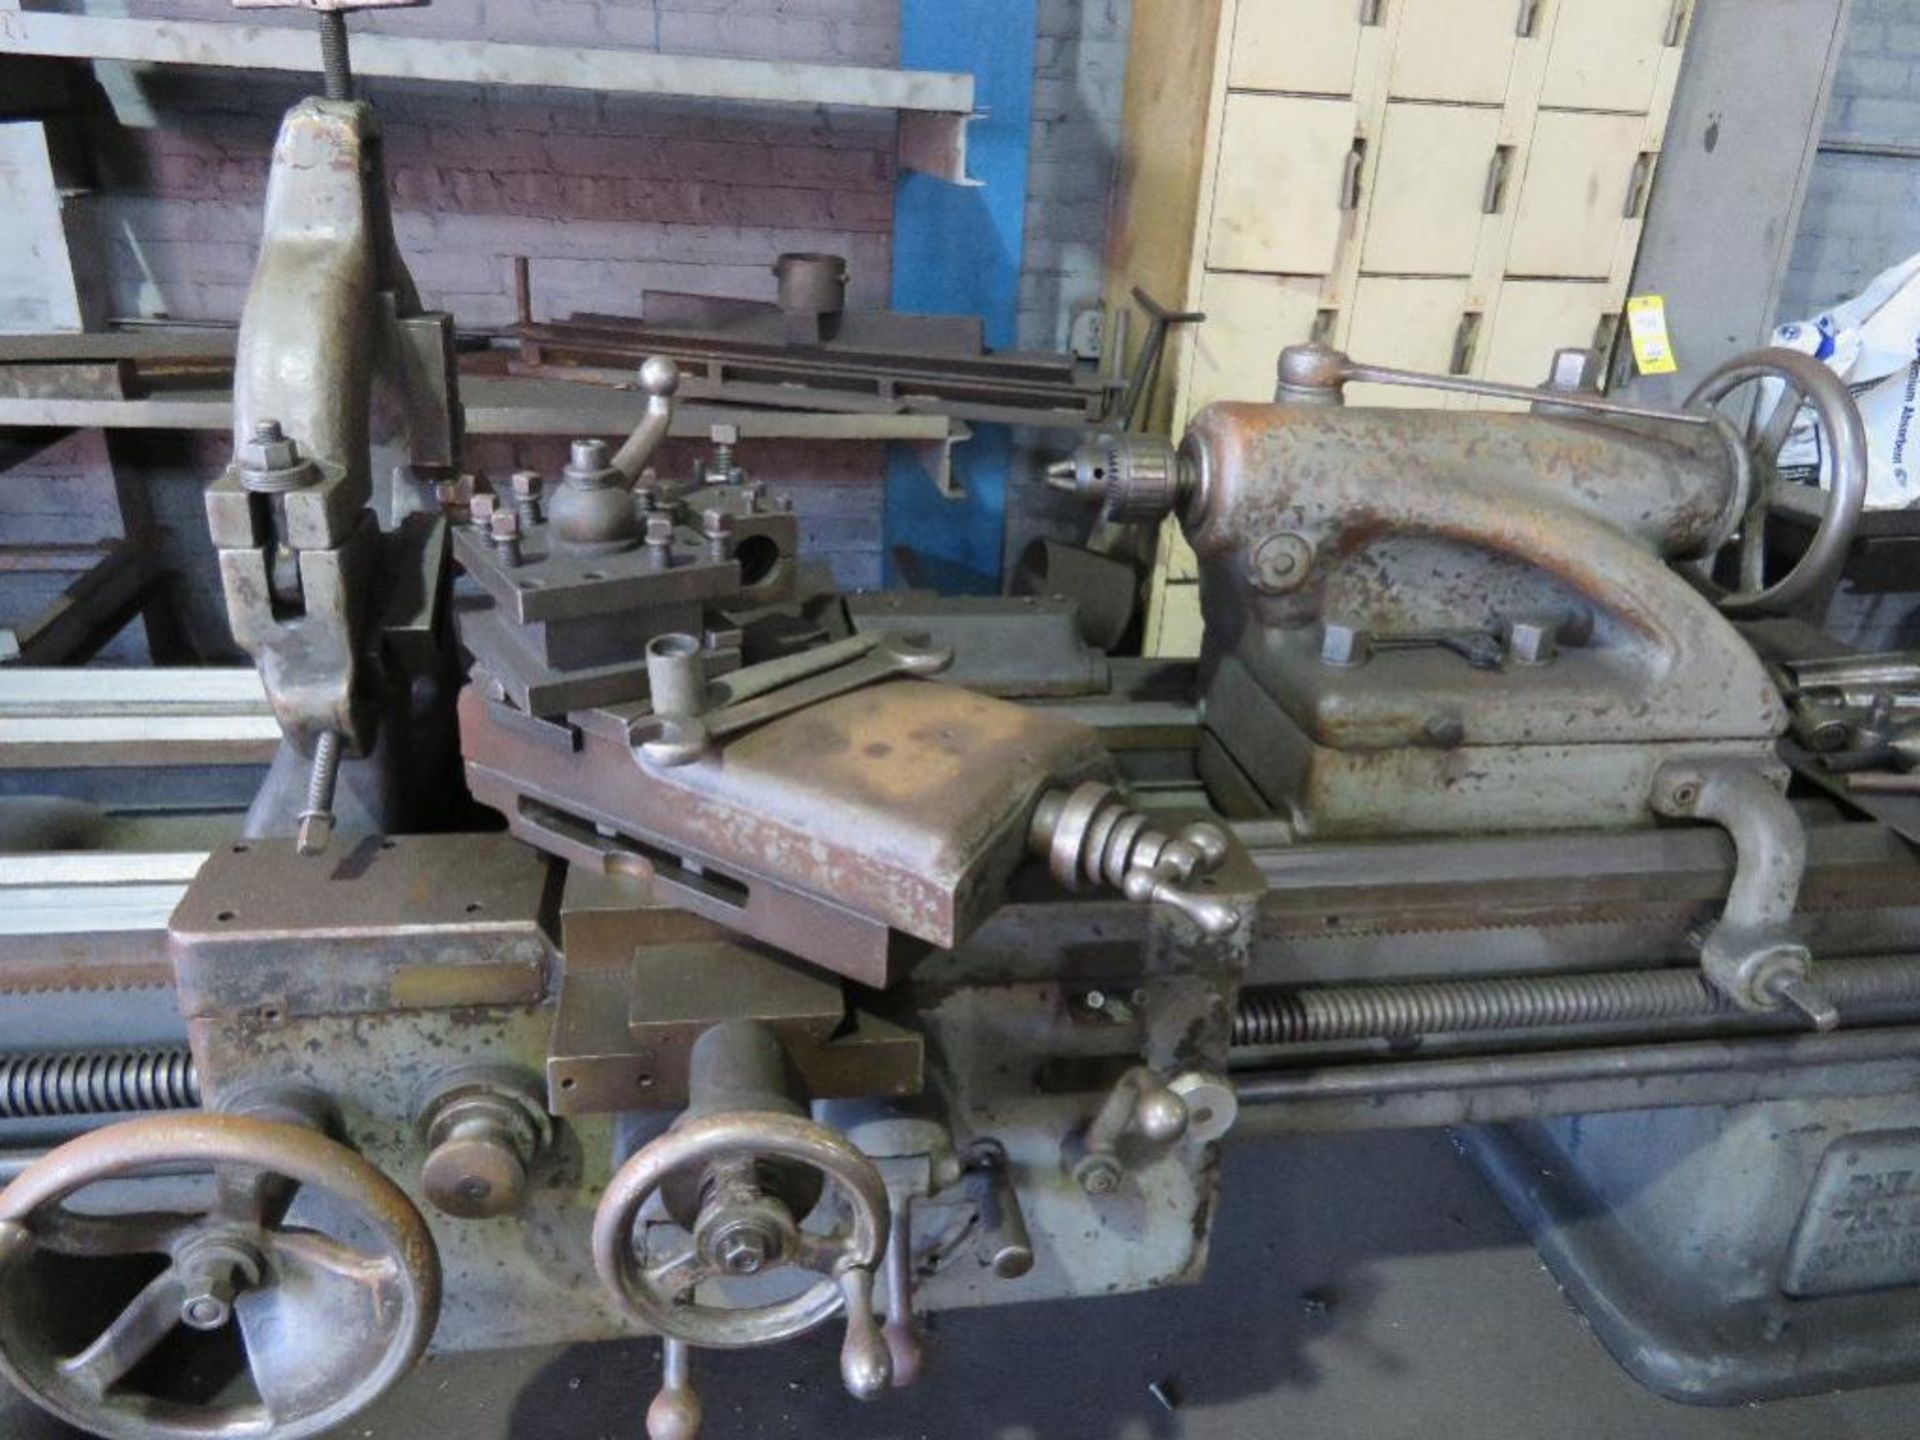 American 26 in. x 148 in. Geared Head Engine Lathe, S/N 65385-42, 21 in. 4-Jaw Chuck, Carriage with - Image 2 of 3